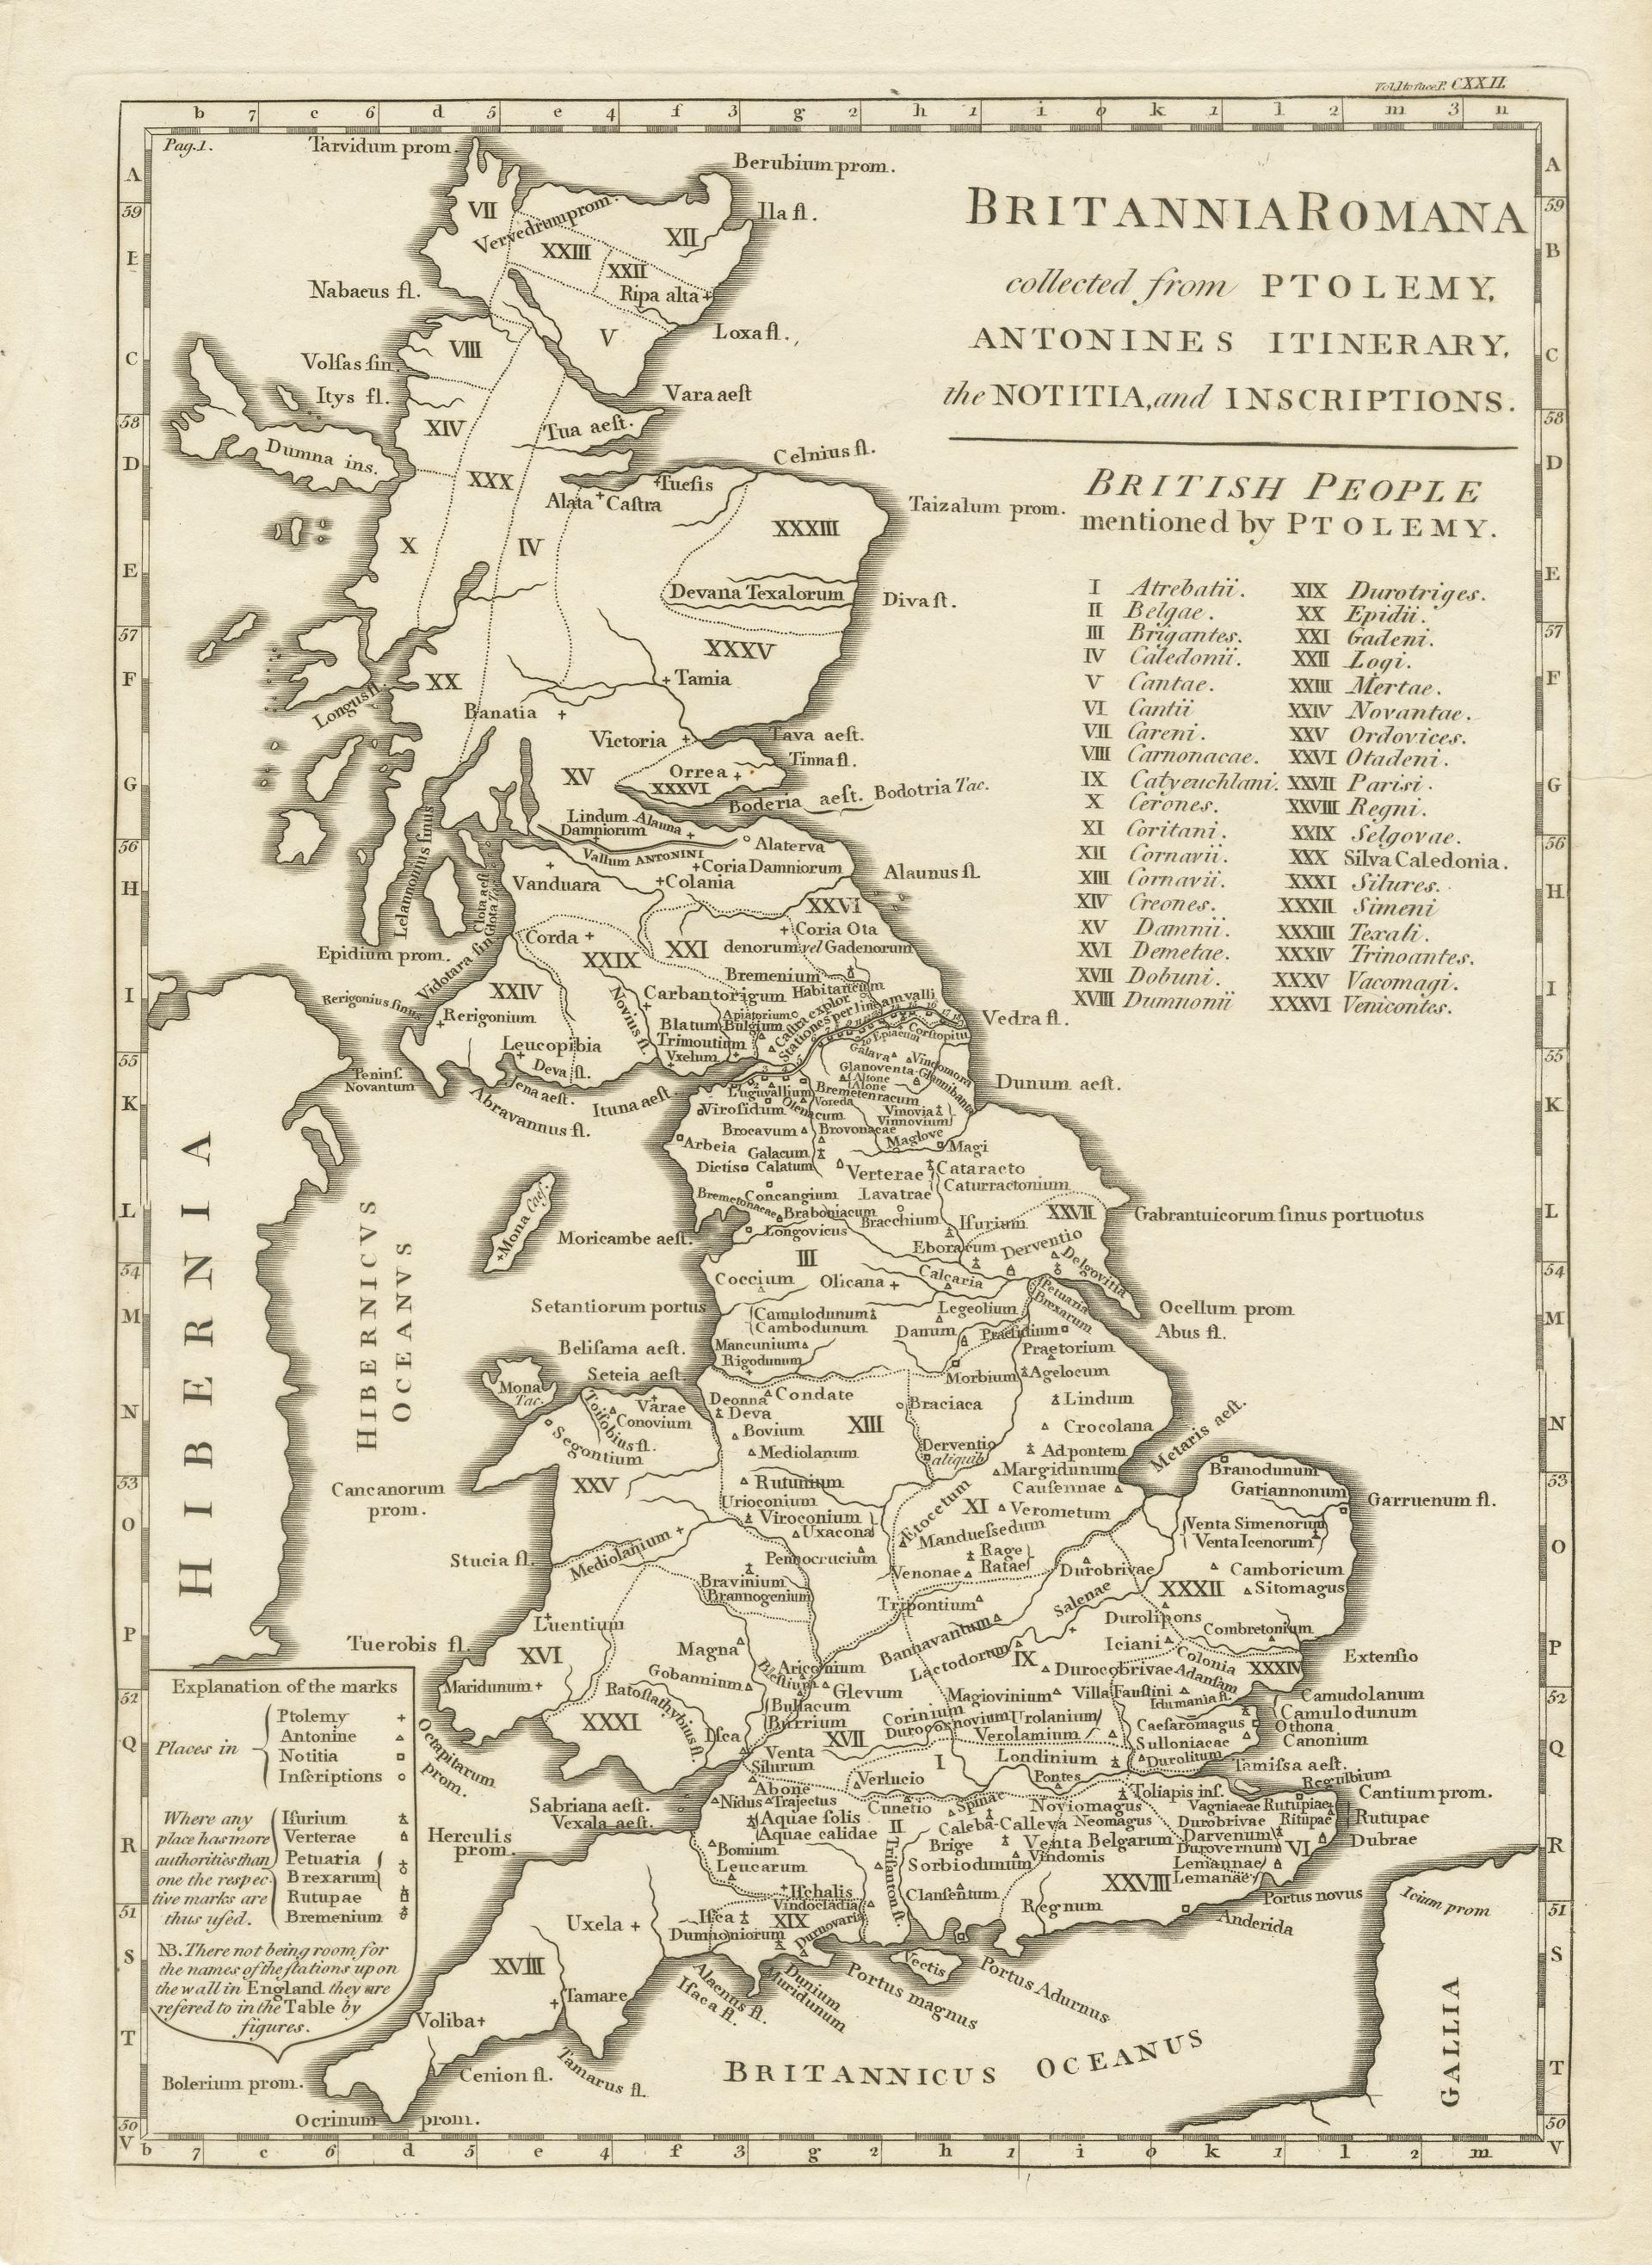 old map of britain